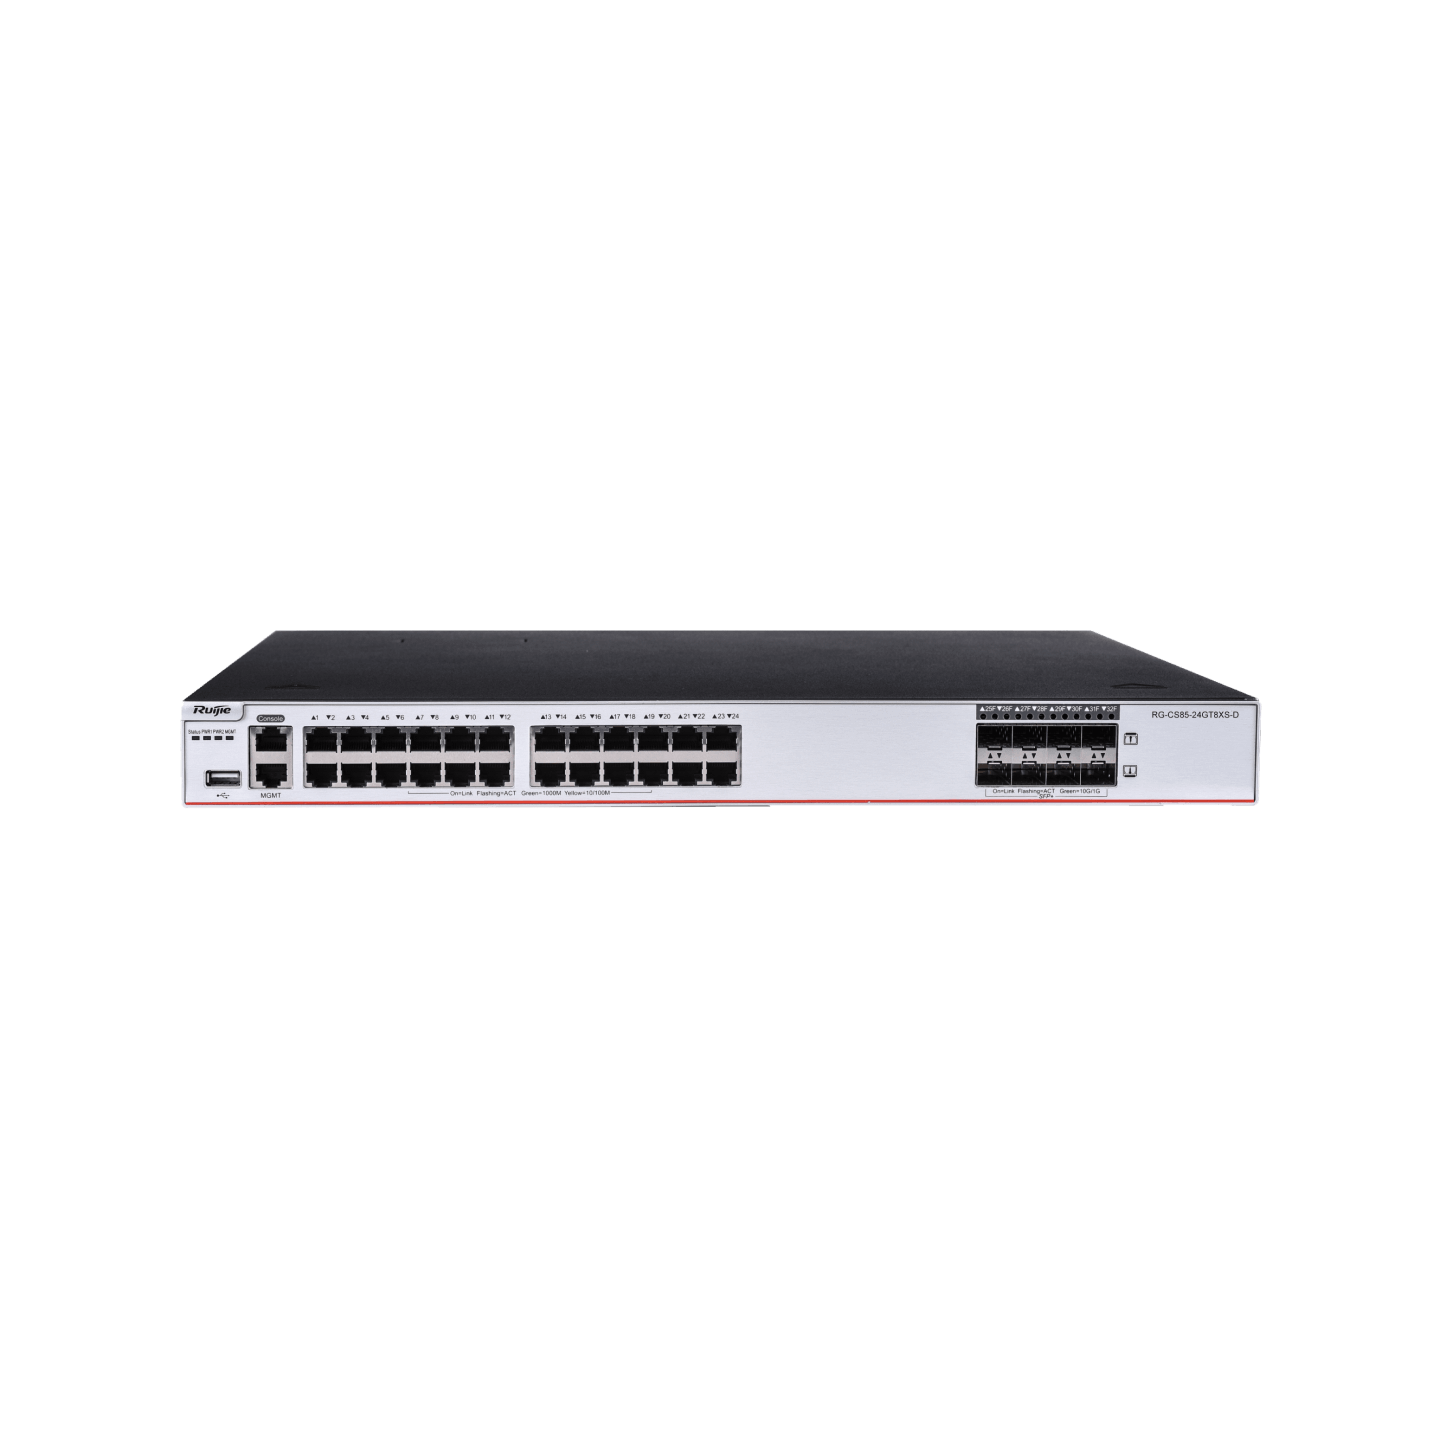 RG-CS85-24GT8XS-D 24-Port GE Electrical Layer 3 Enterprise-Class Core or Aggregation Switch,8 × 10G Uplink Ports